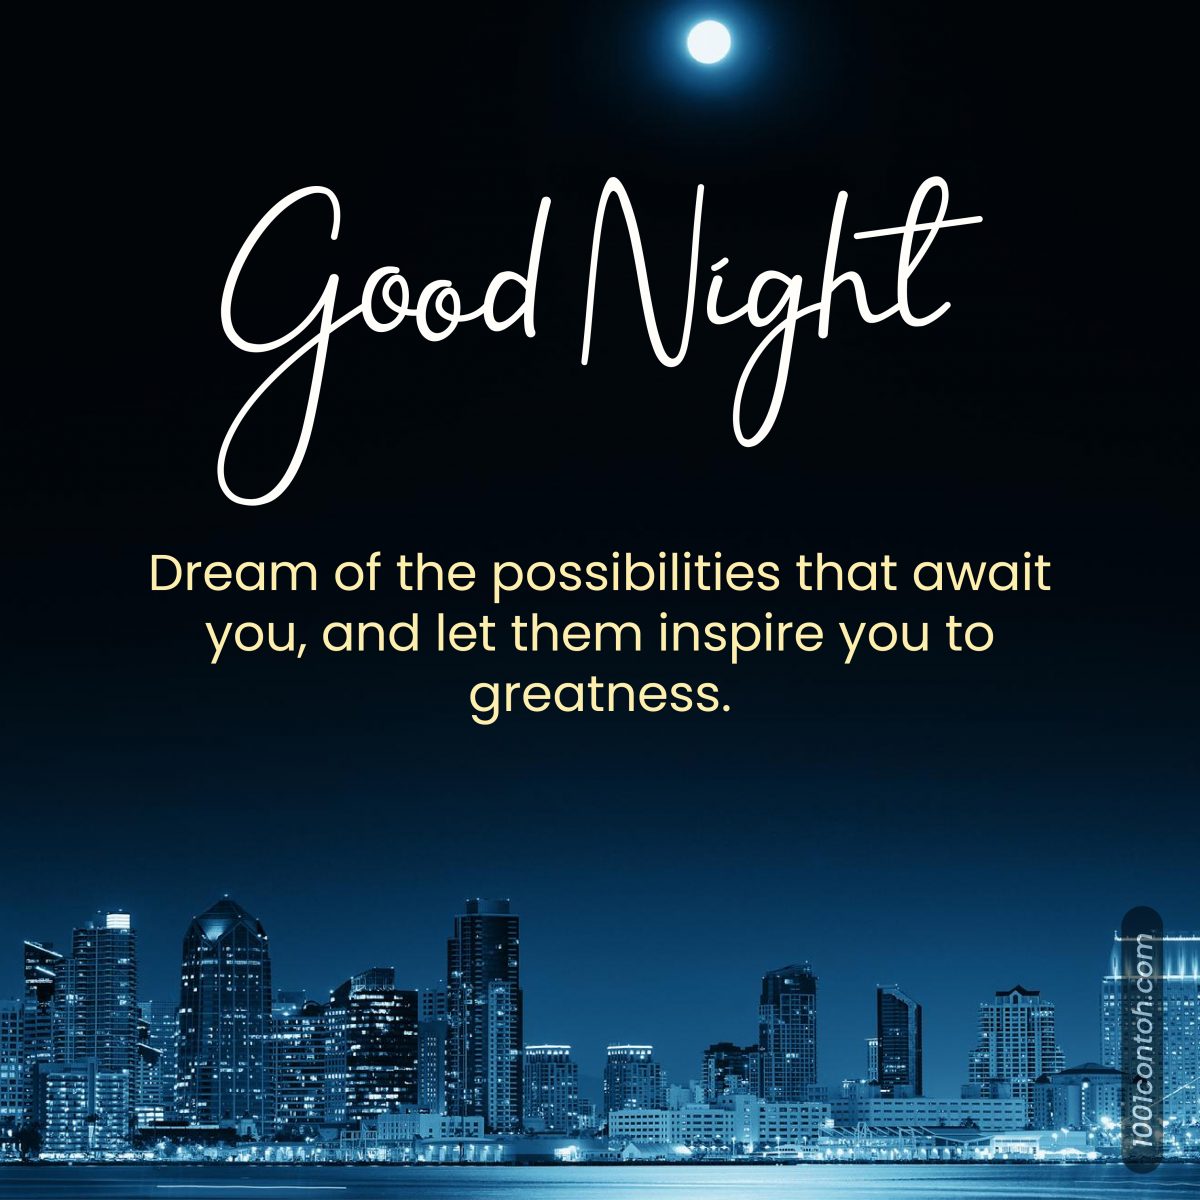 100 Simple & Short - Good Night Quotes, Wishes - 1001 Contoh